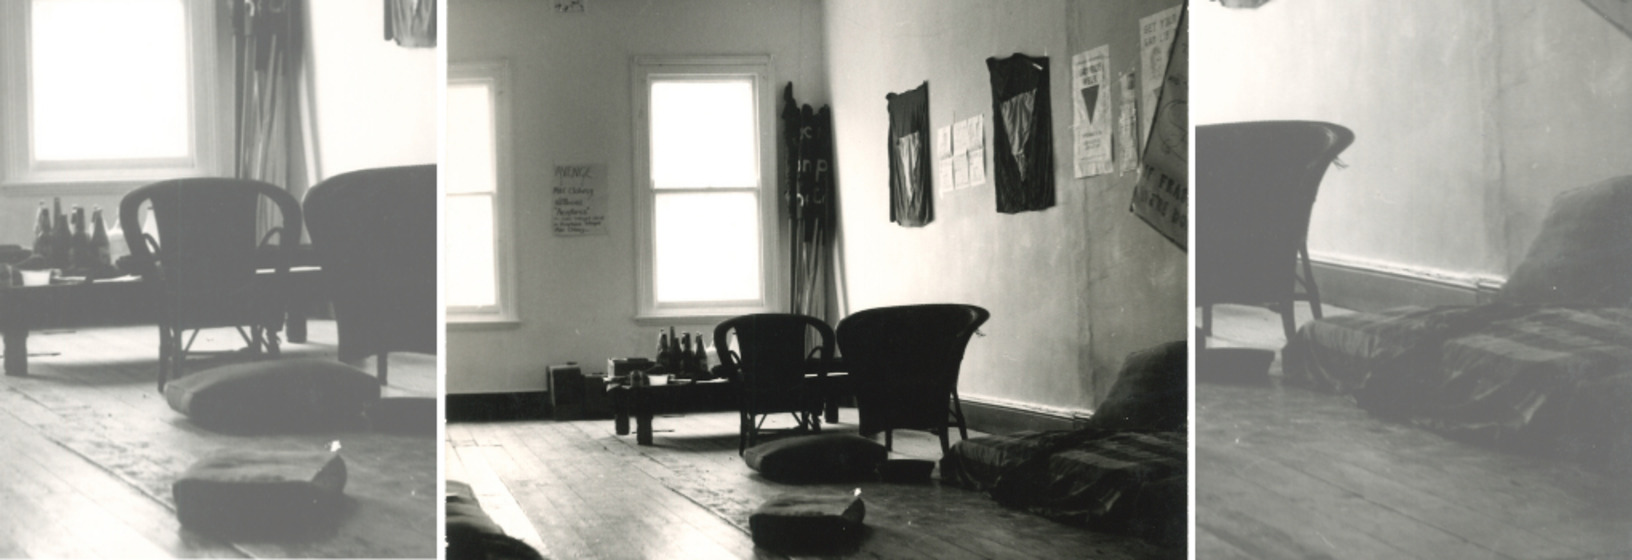 Black and white image of two bucket chairs in a room with a single window in the background and two artworks on the opposite wall, collaged to create a banner image